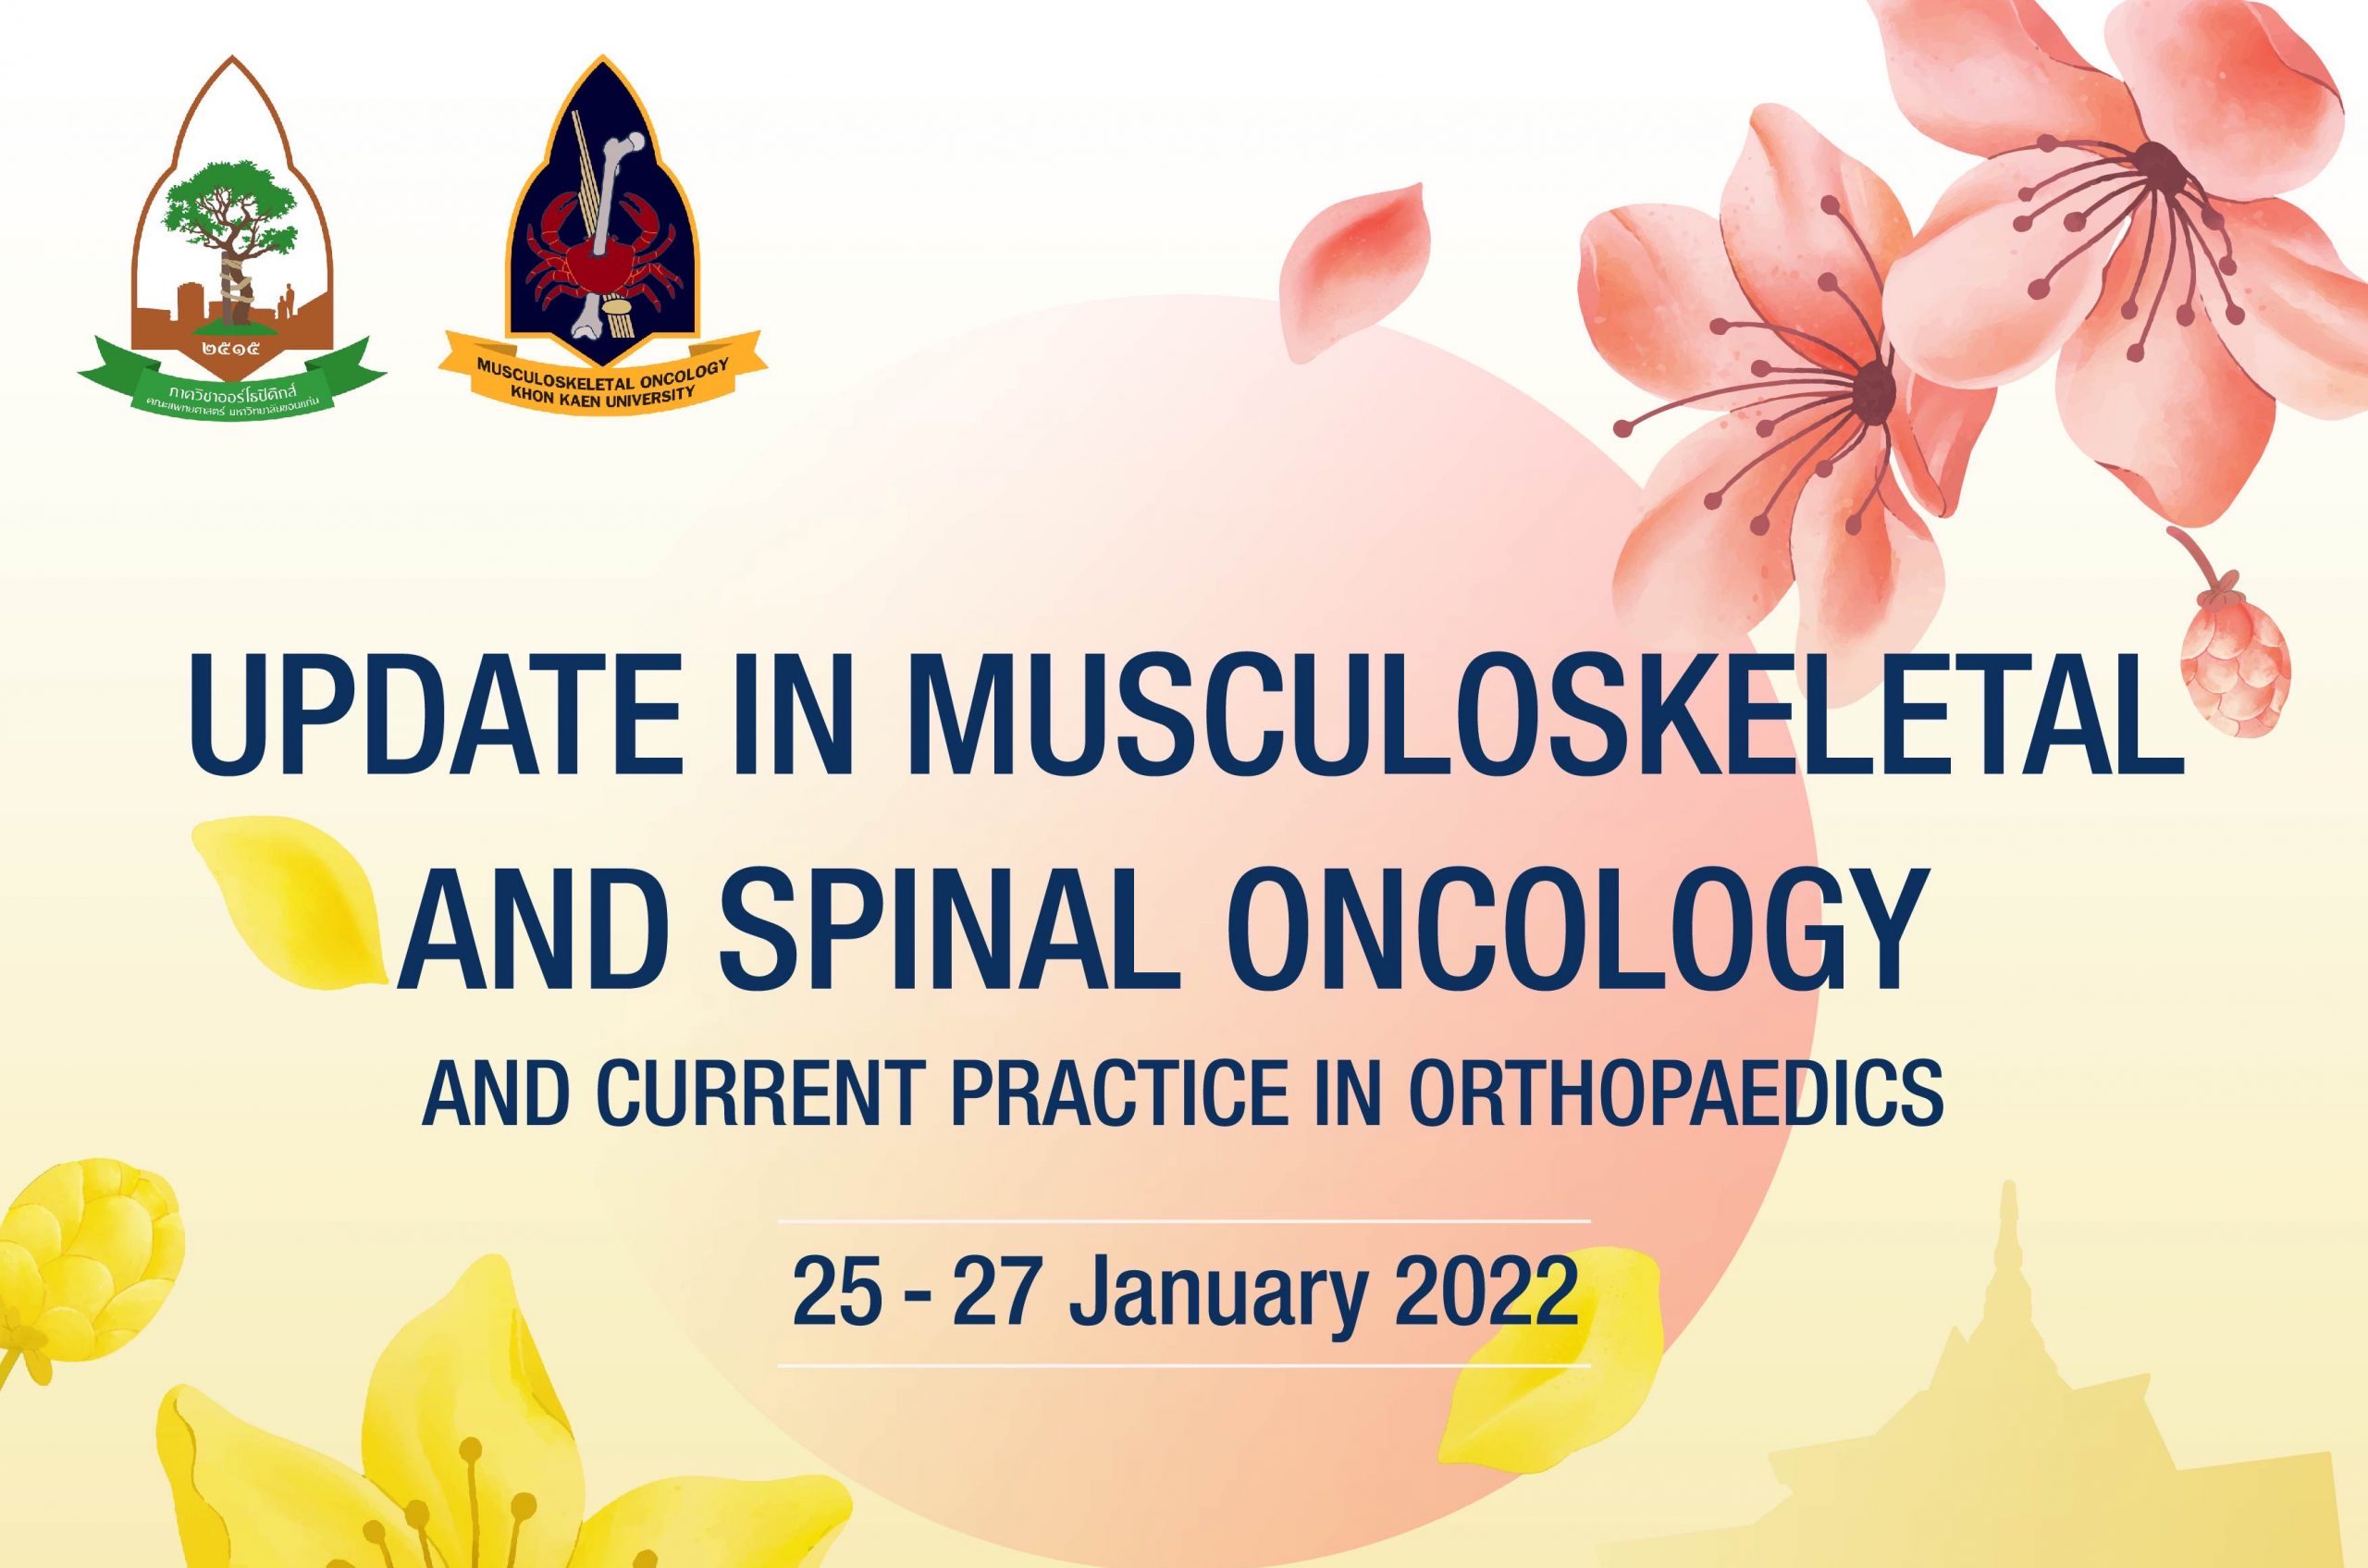 Update in Musculoskeletal and Spinal Oncology and Current Practice in Orthopaedics